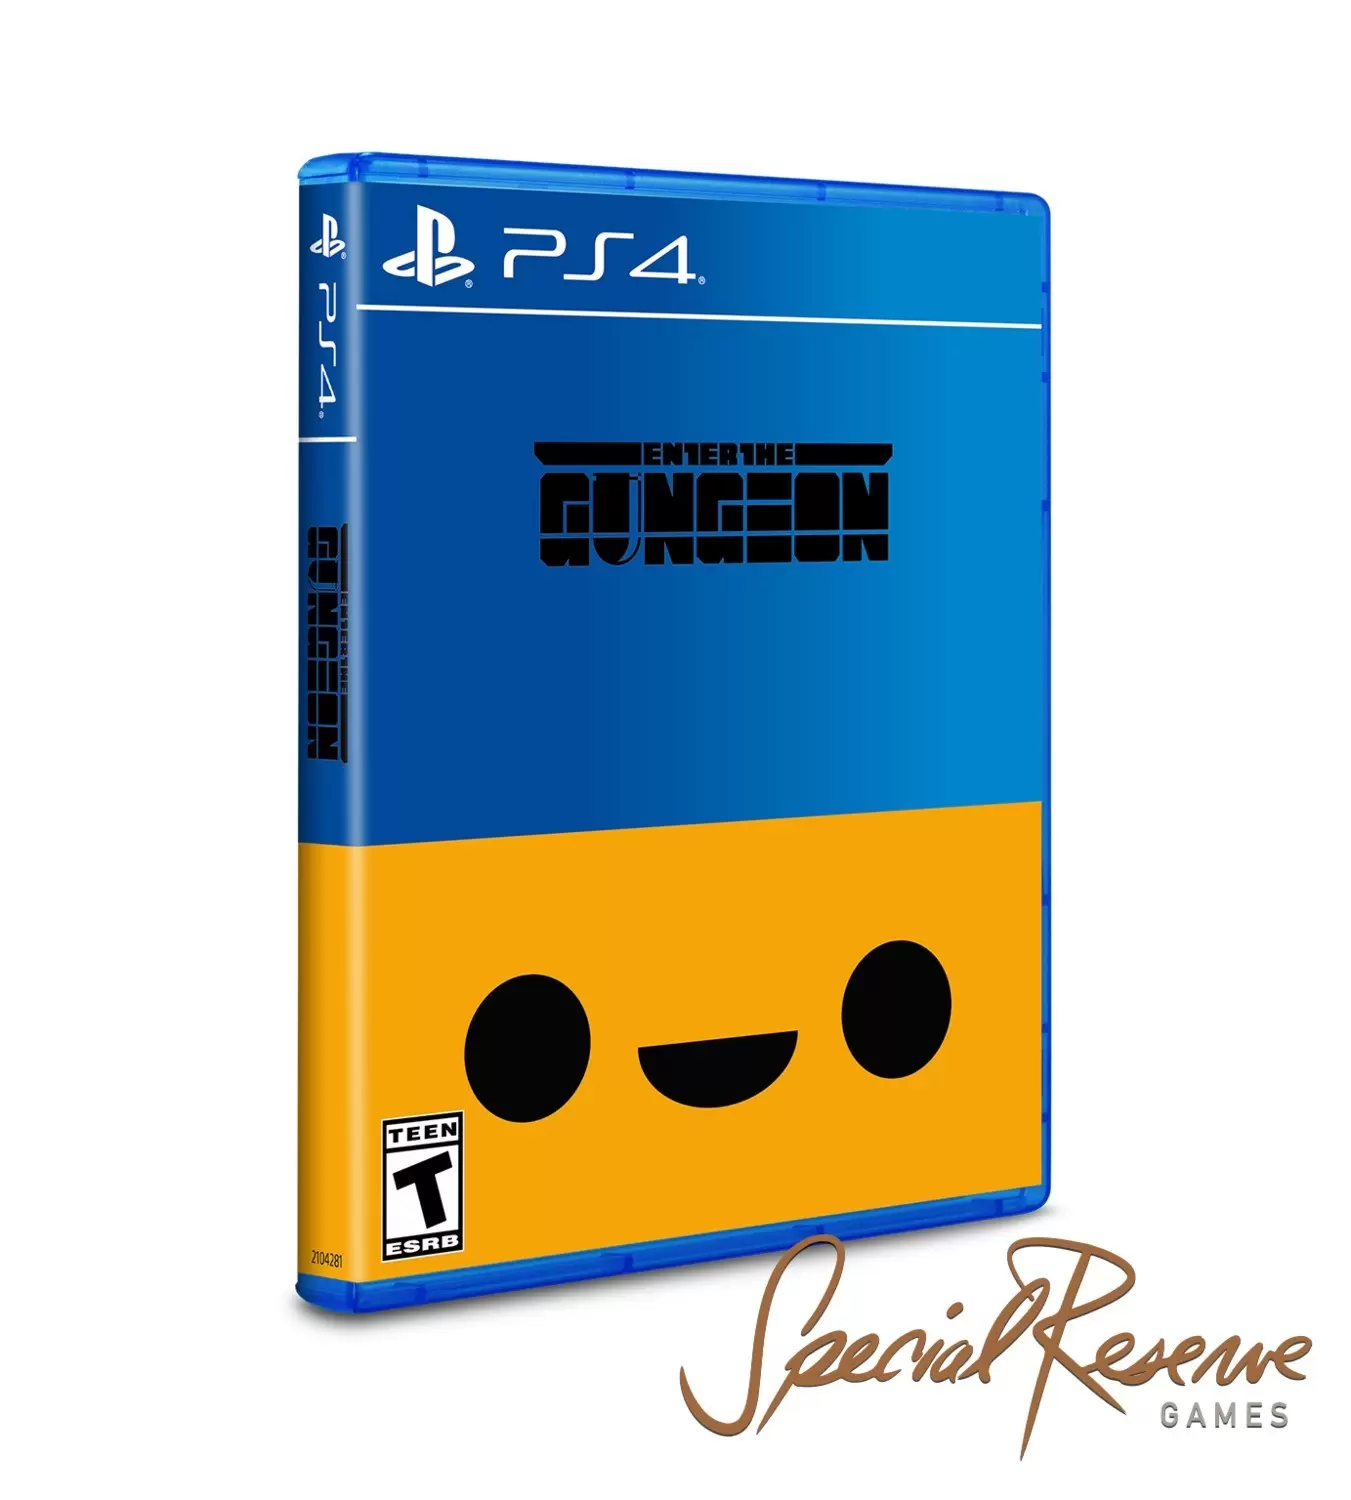 Jeux PS4 - Enter the Gungeon - Limited Run Games Exclusive Variant